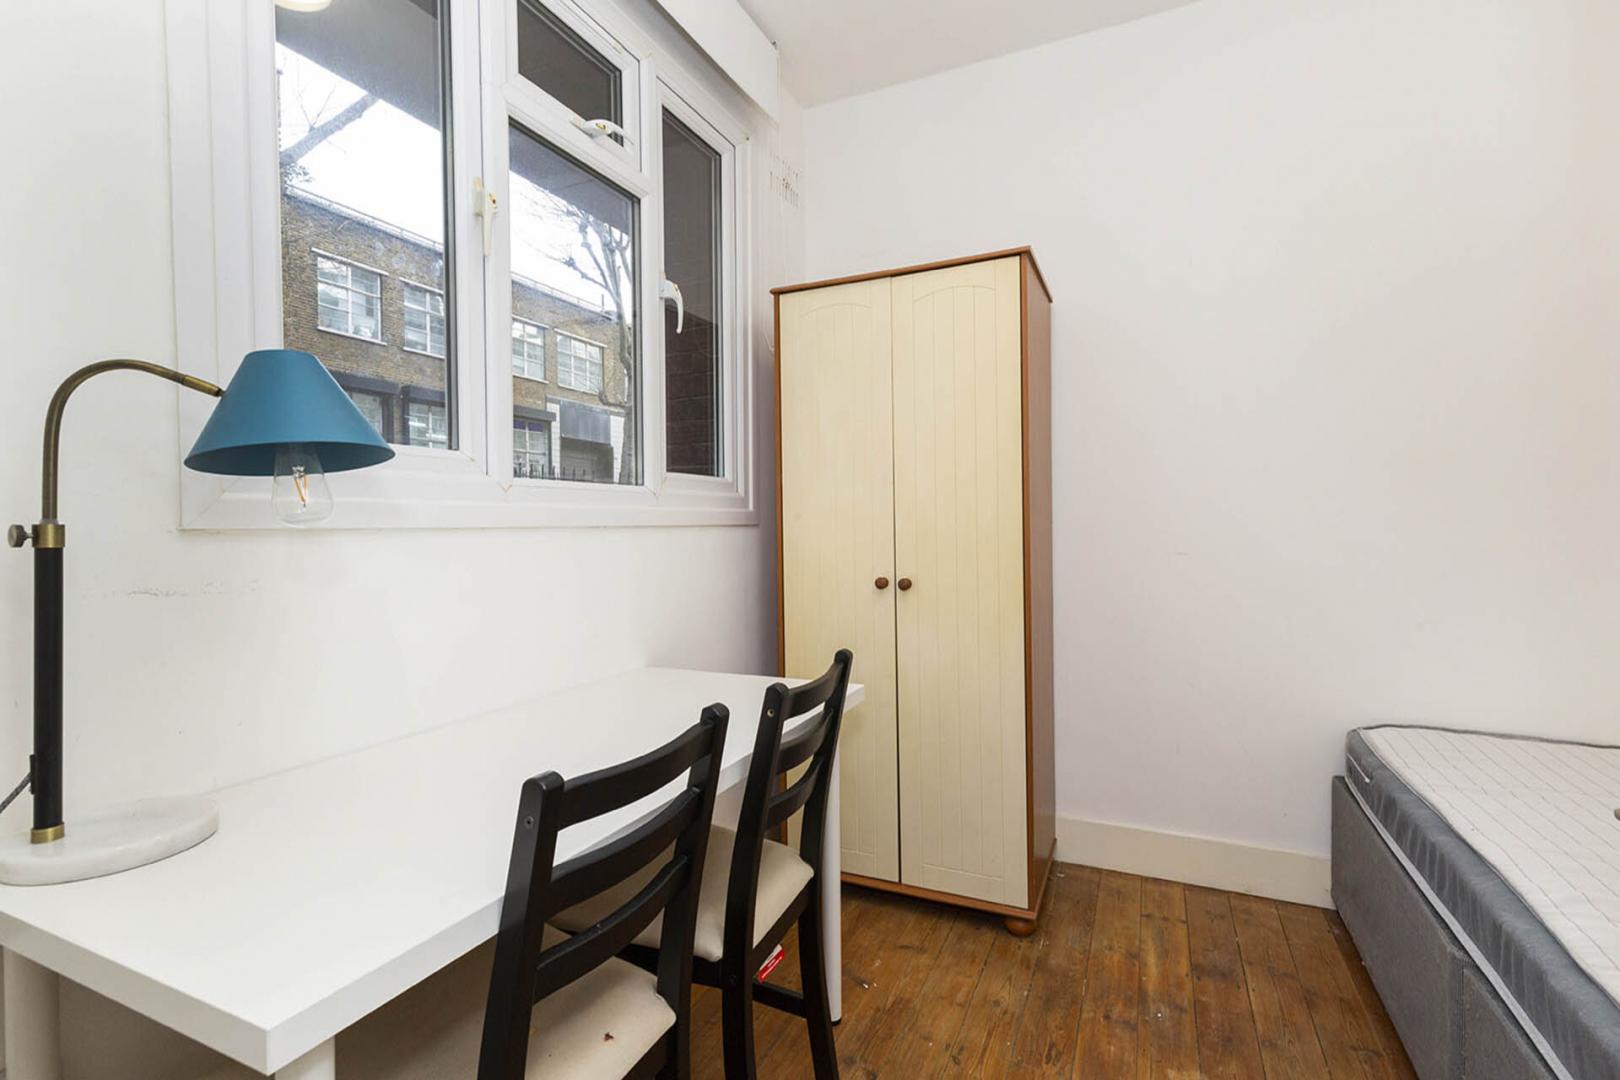 Located in the heart of Shoreditch a modern 2 bedroom flat  Bevenden Street, Old Street 